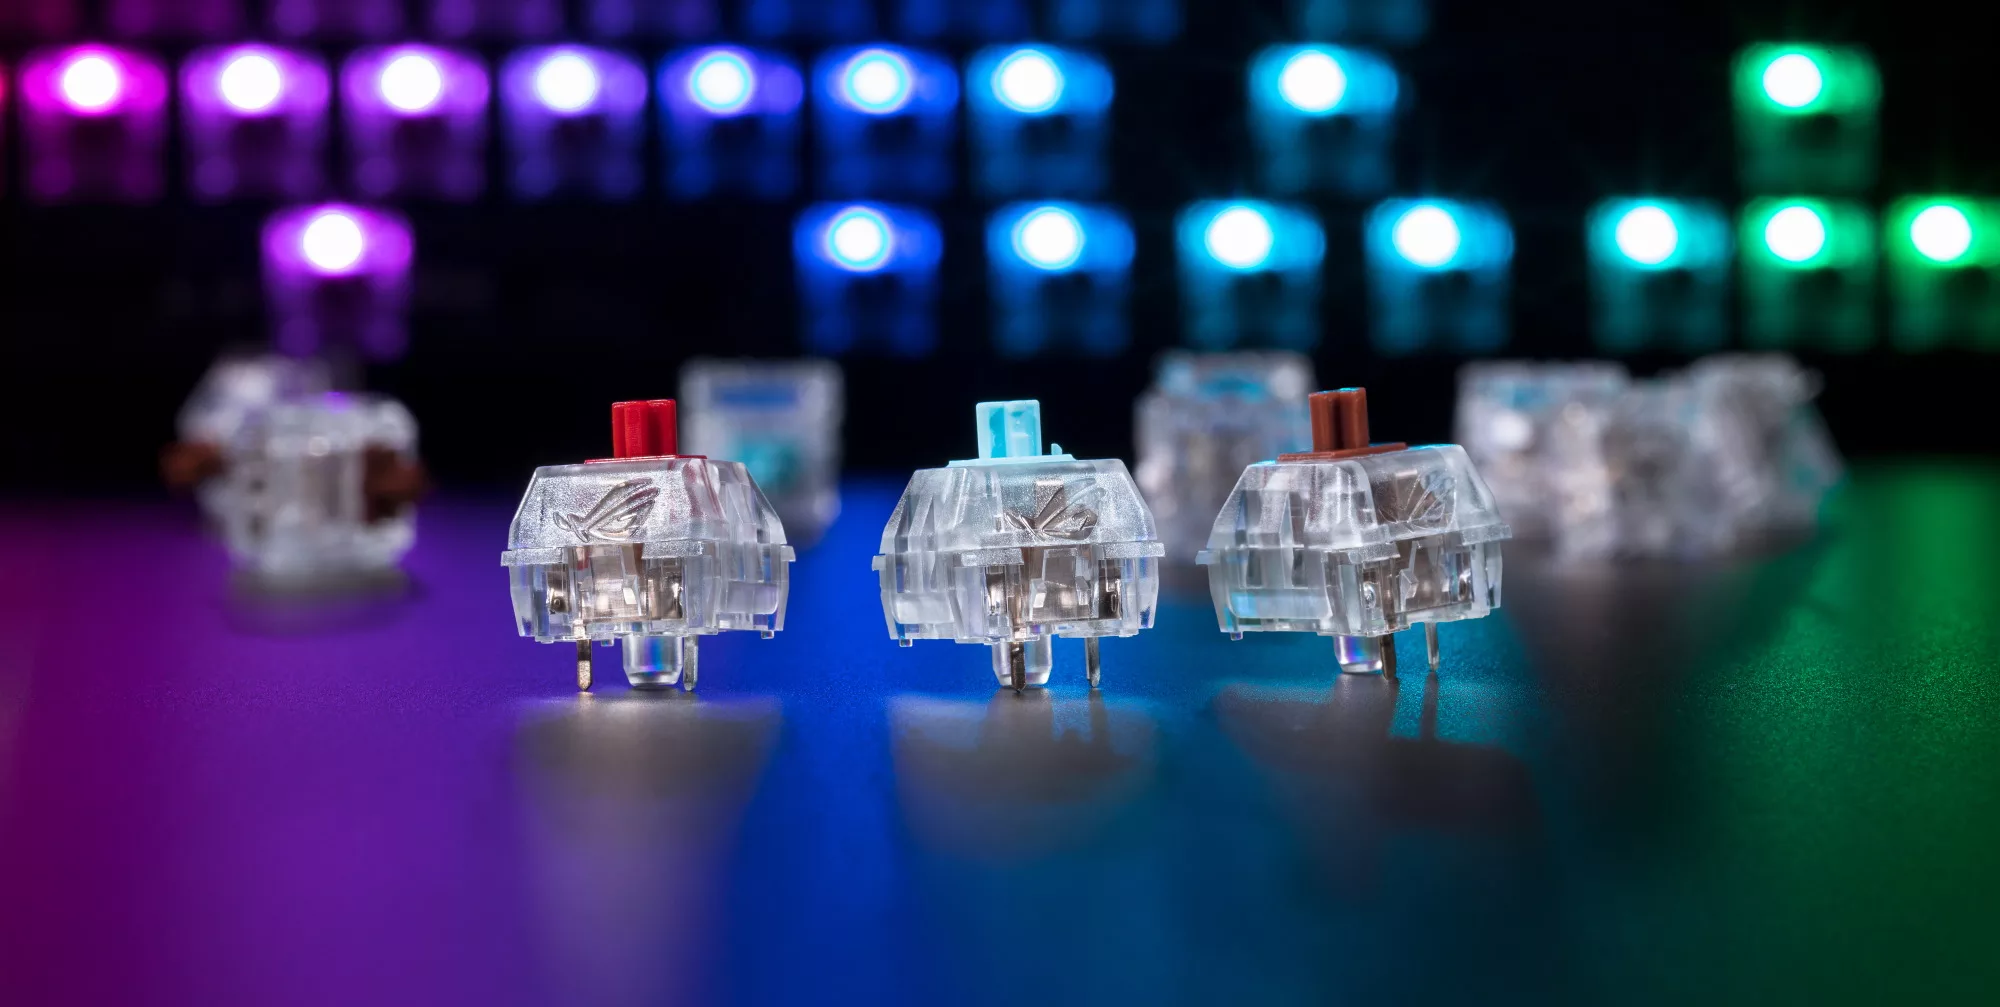 Three types of key switches on display, with RGB light diffuse in the background.